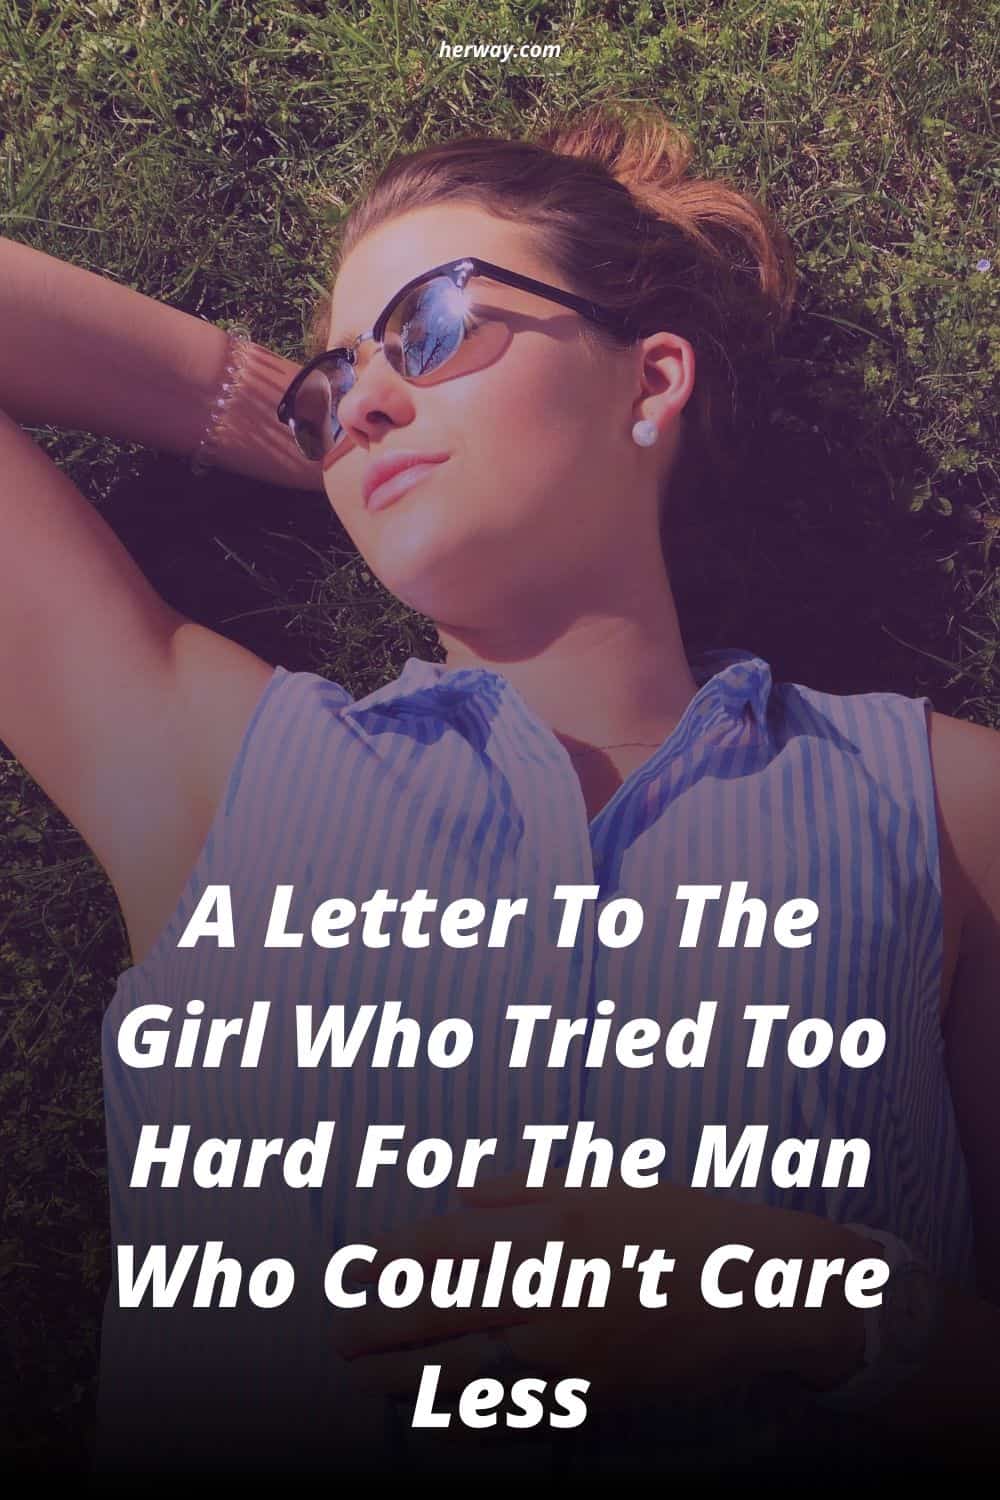 A Letter To The Girl Who Tried Too Hard For The Man Who Couldn't Care Less